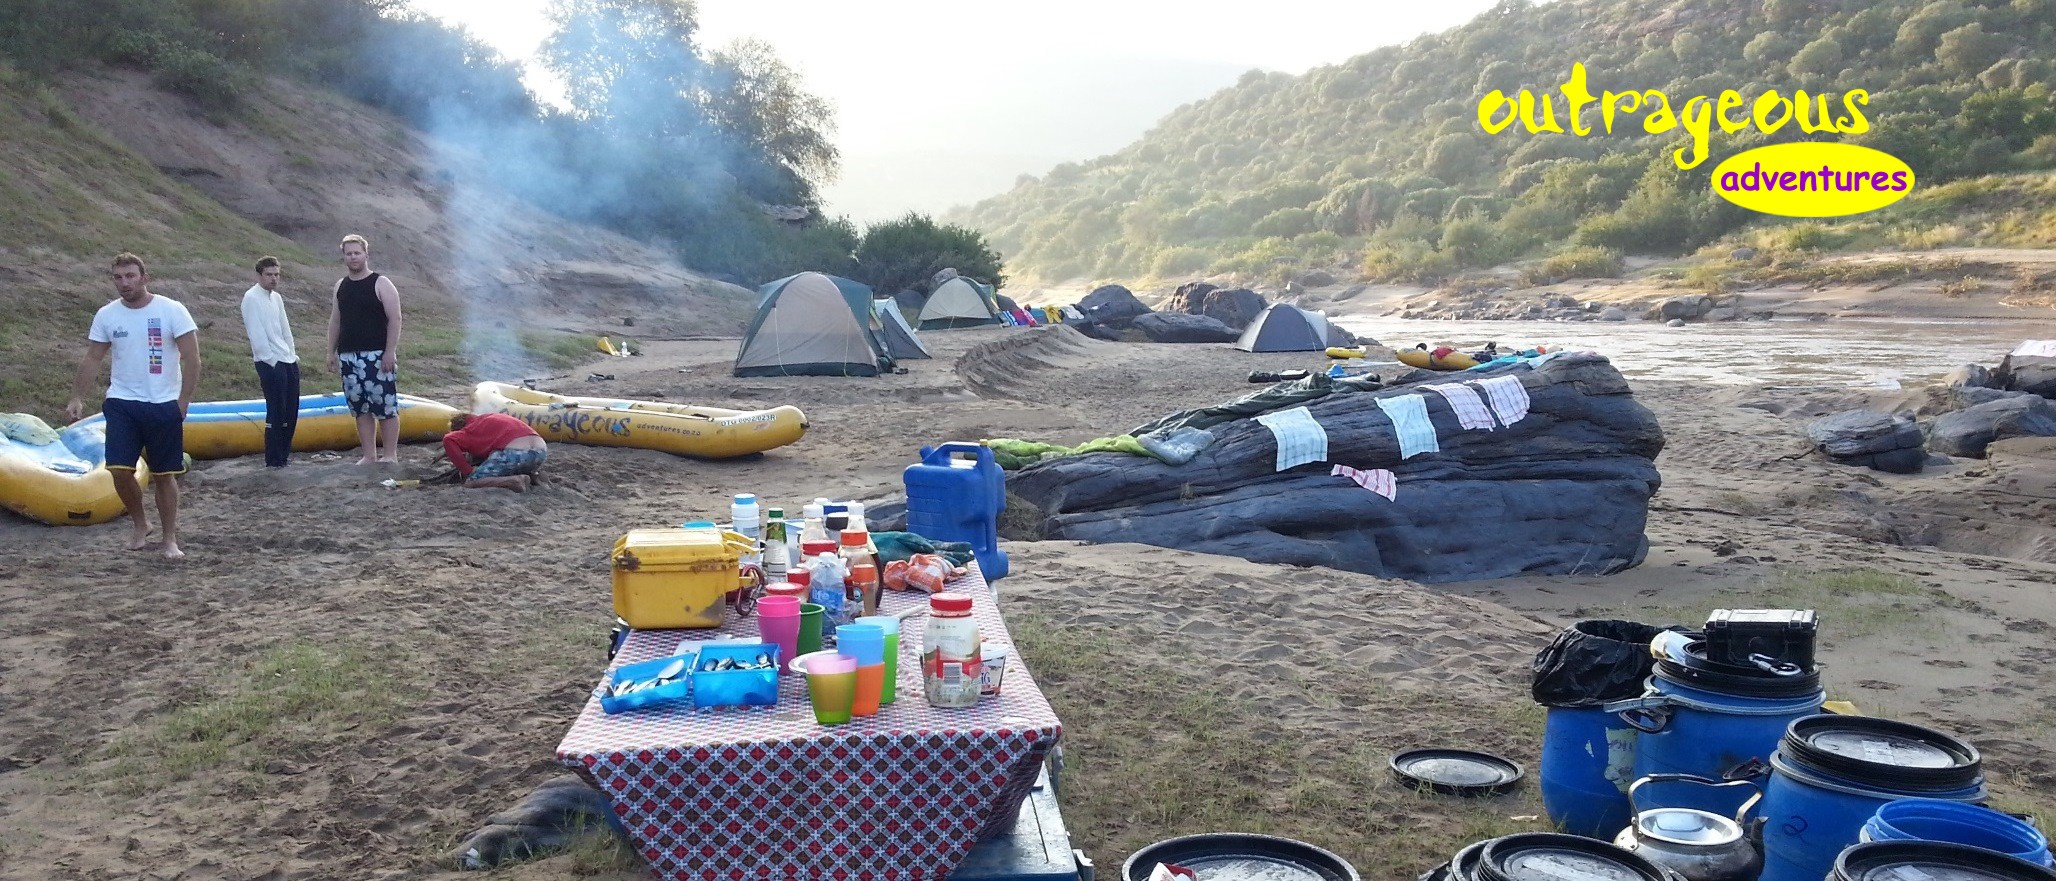 camping next to the Orange River on a multi-day rafting adventure.